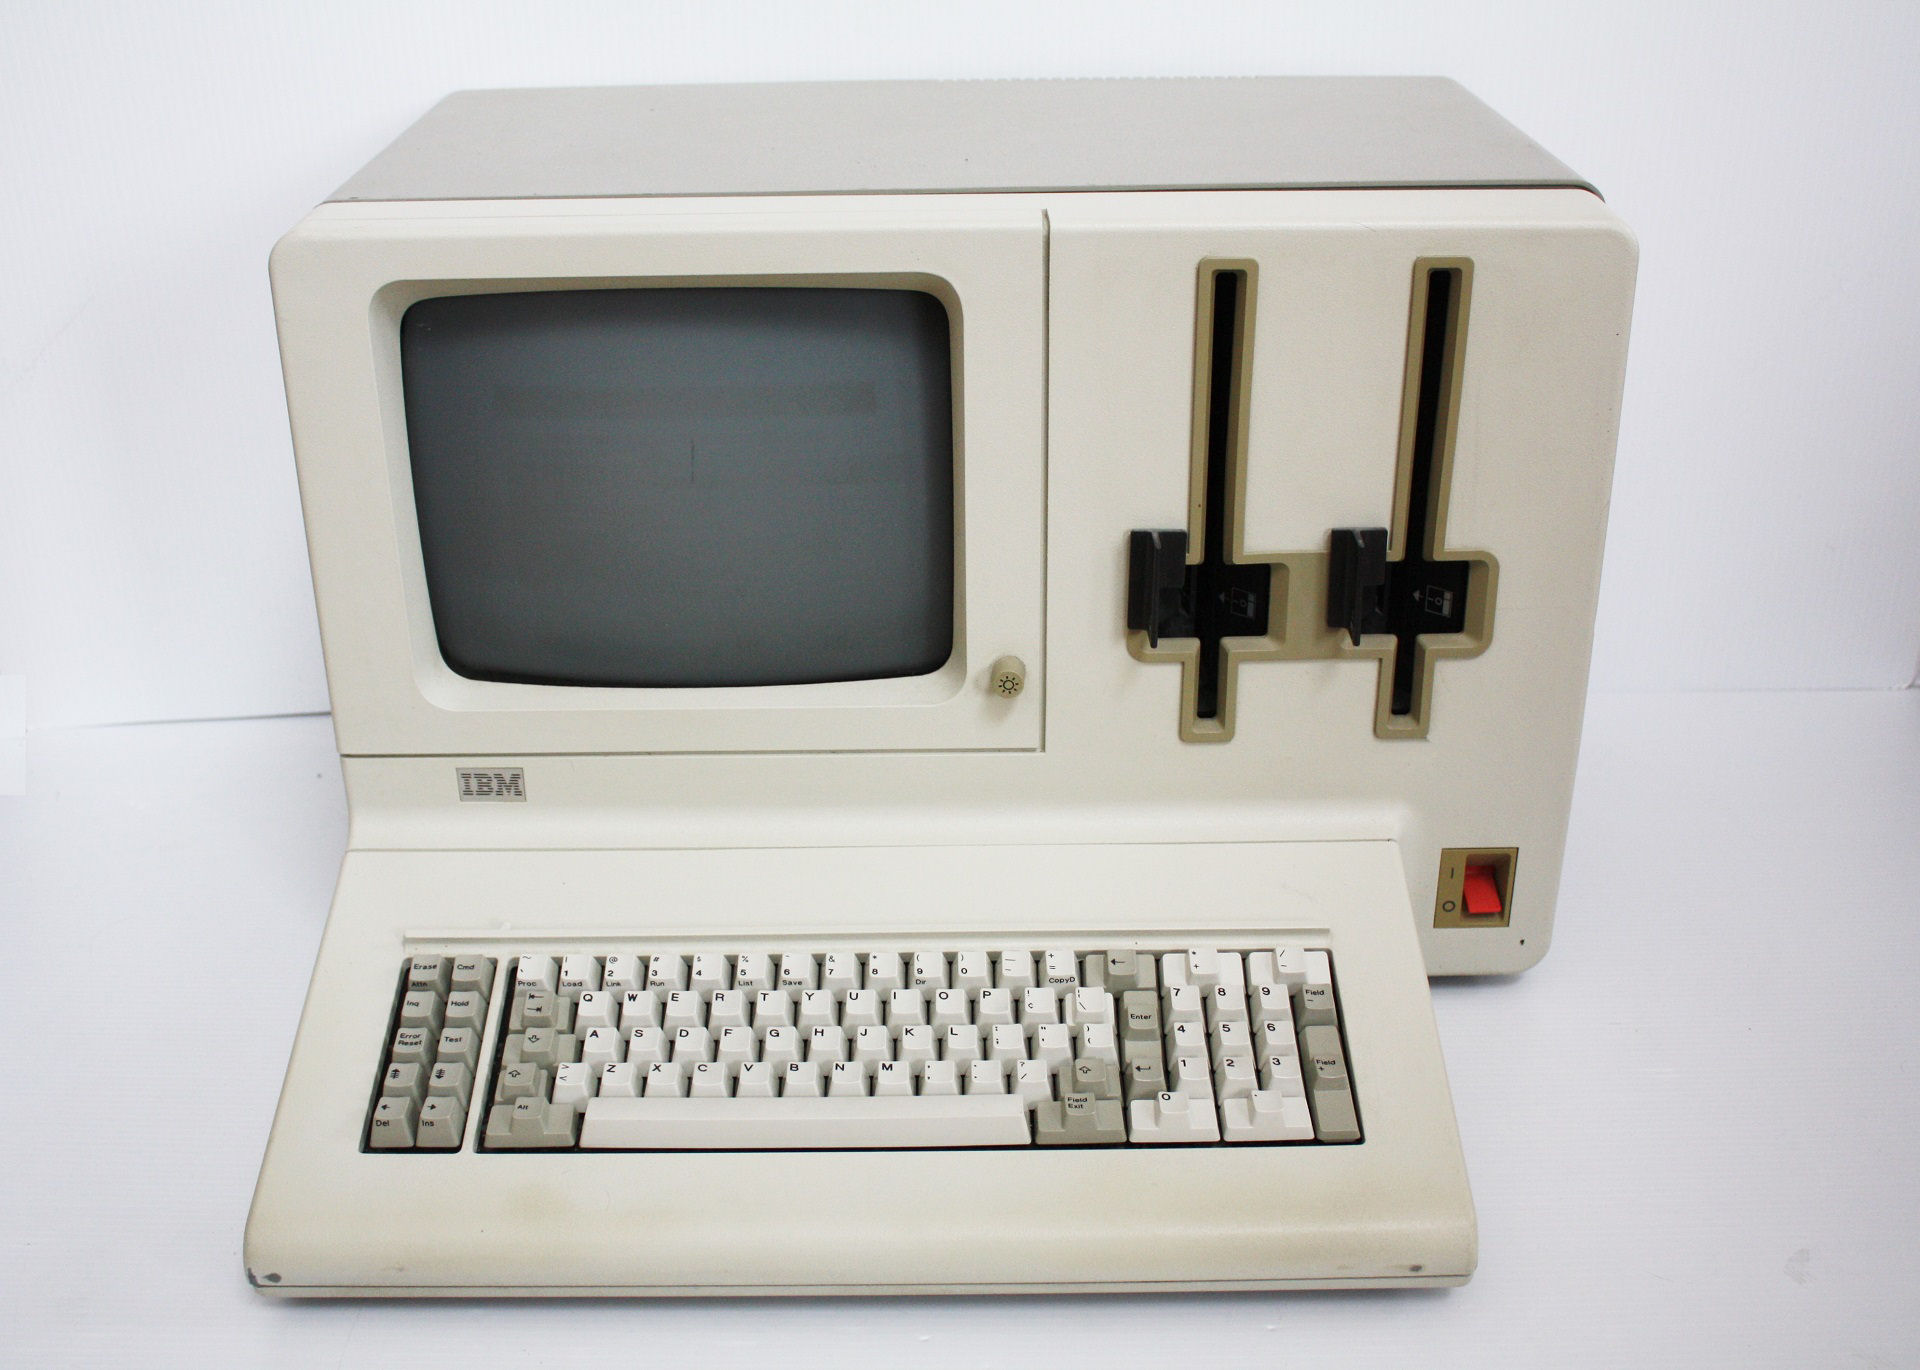 The IBM 5322 Datamaster that Dean Mark produced a word adapter for.